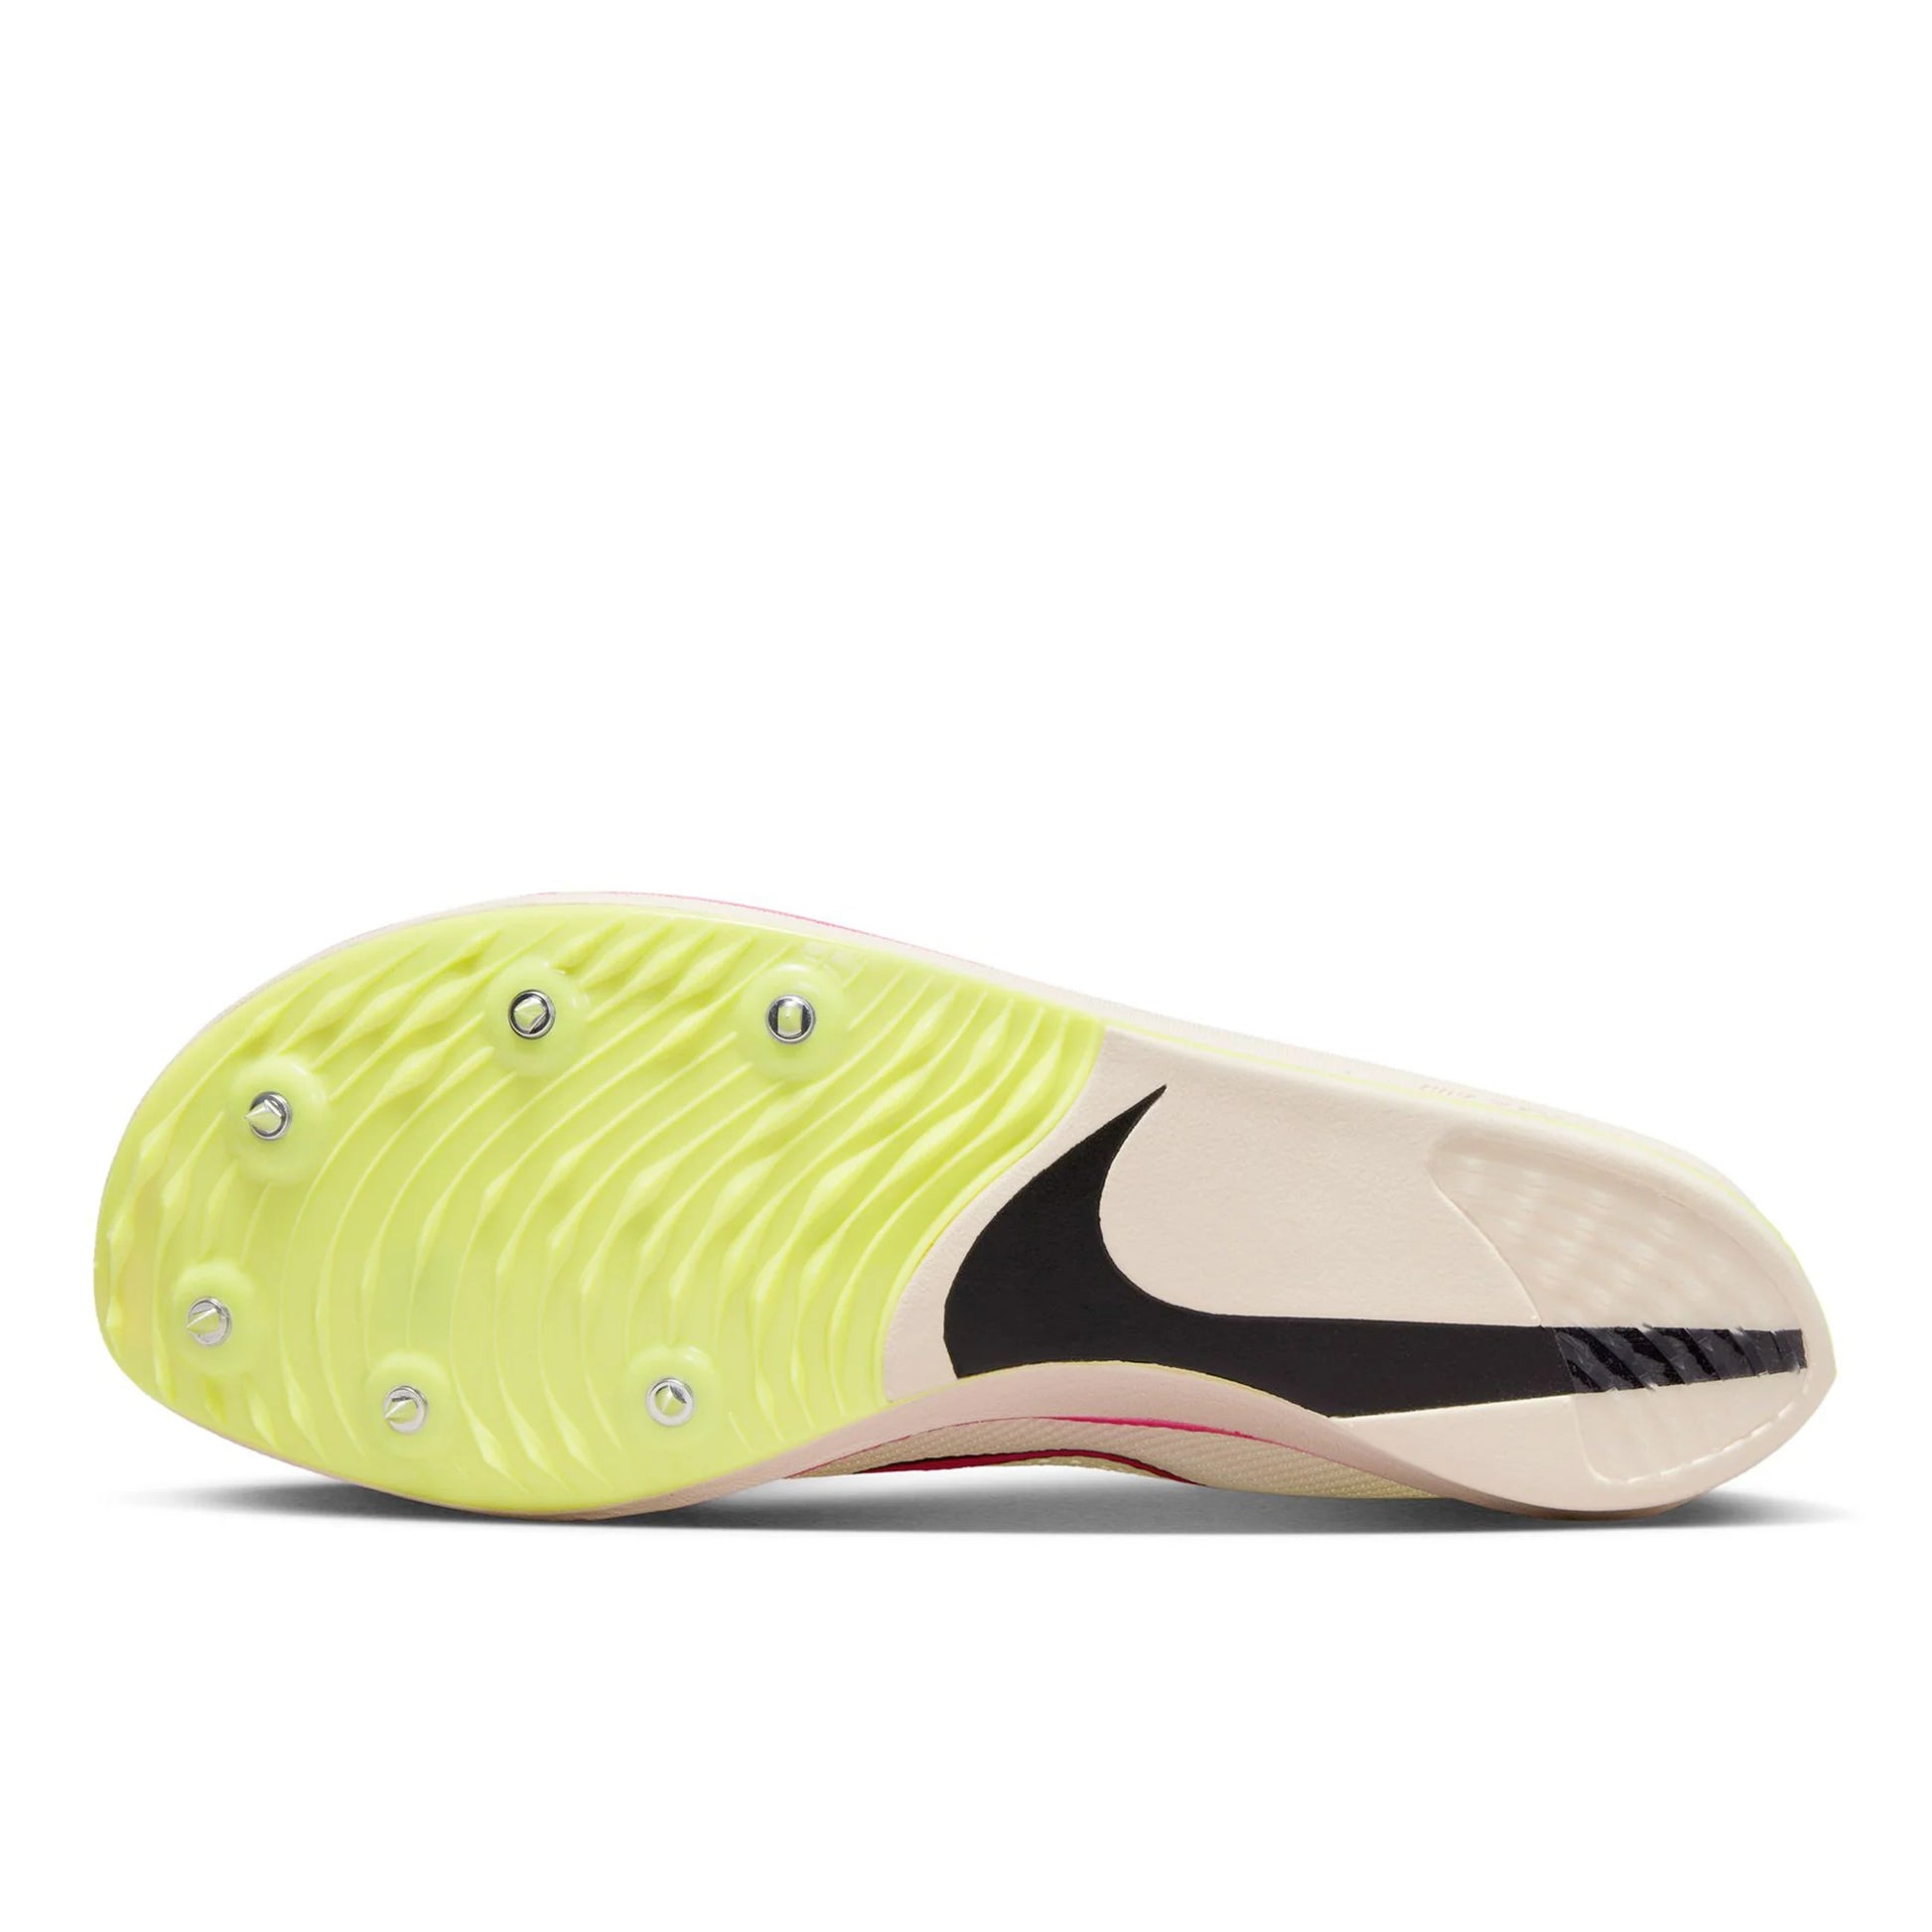 Unisex Nike Zoomx Dragonfly – The Running Company